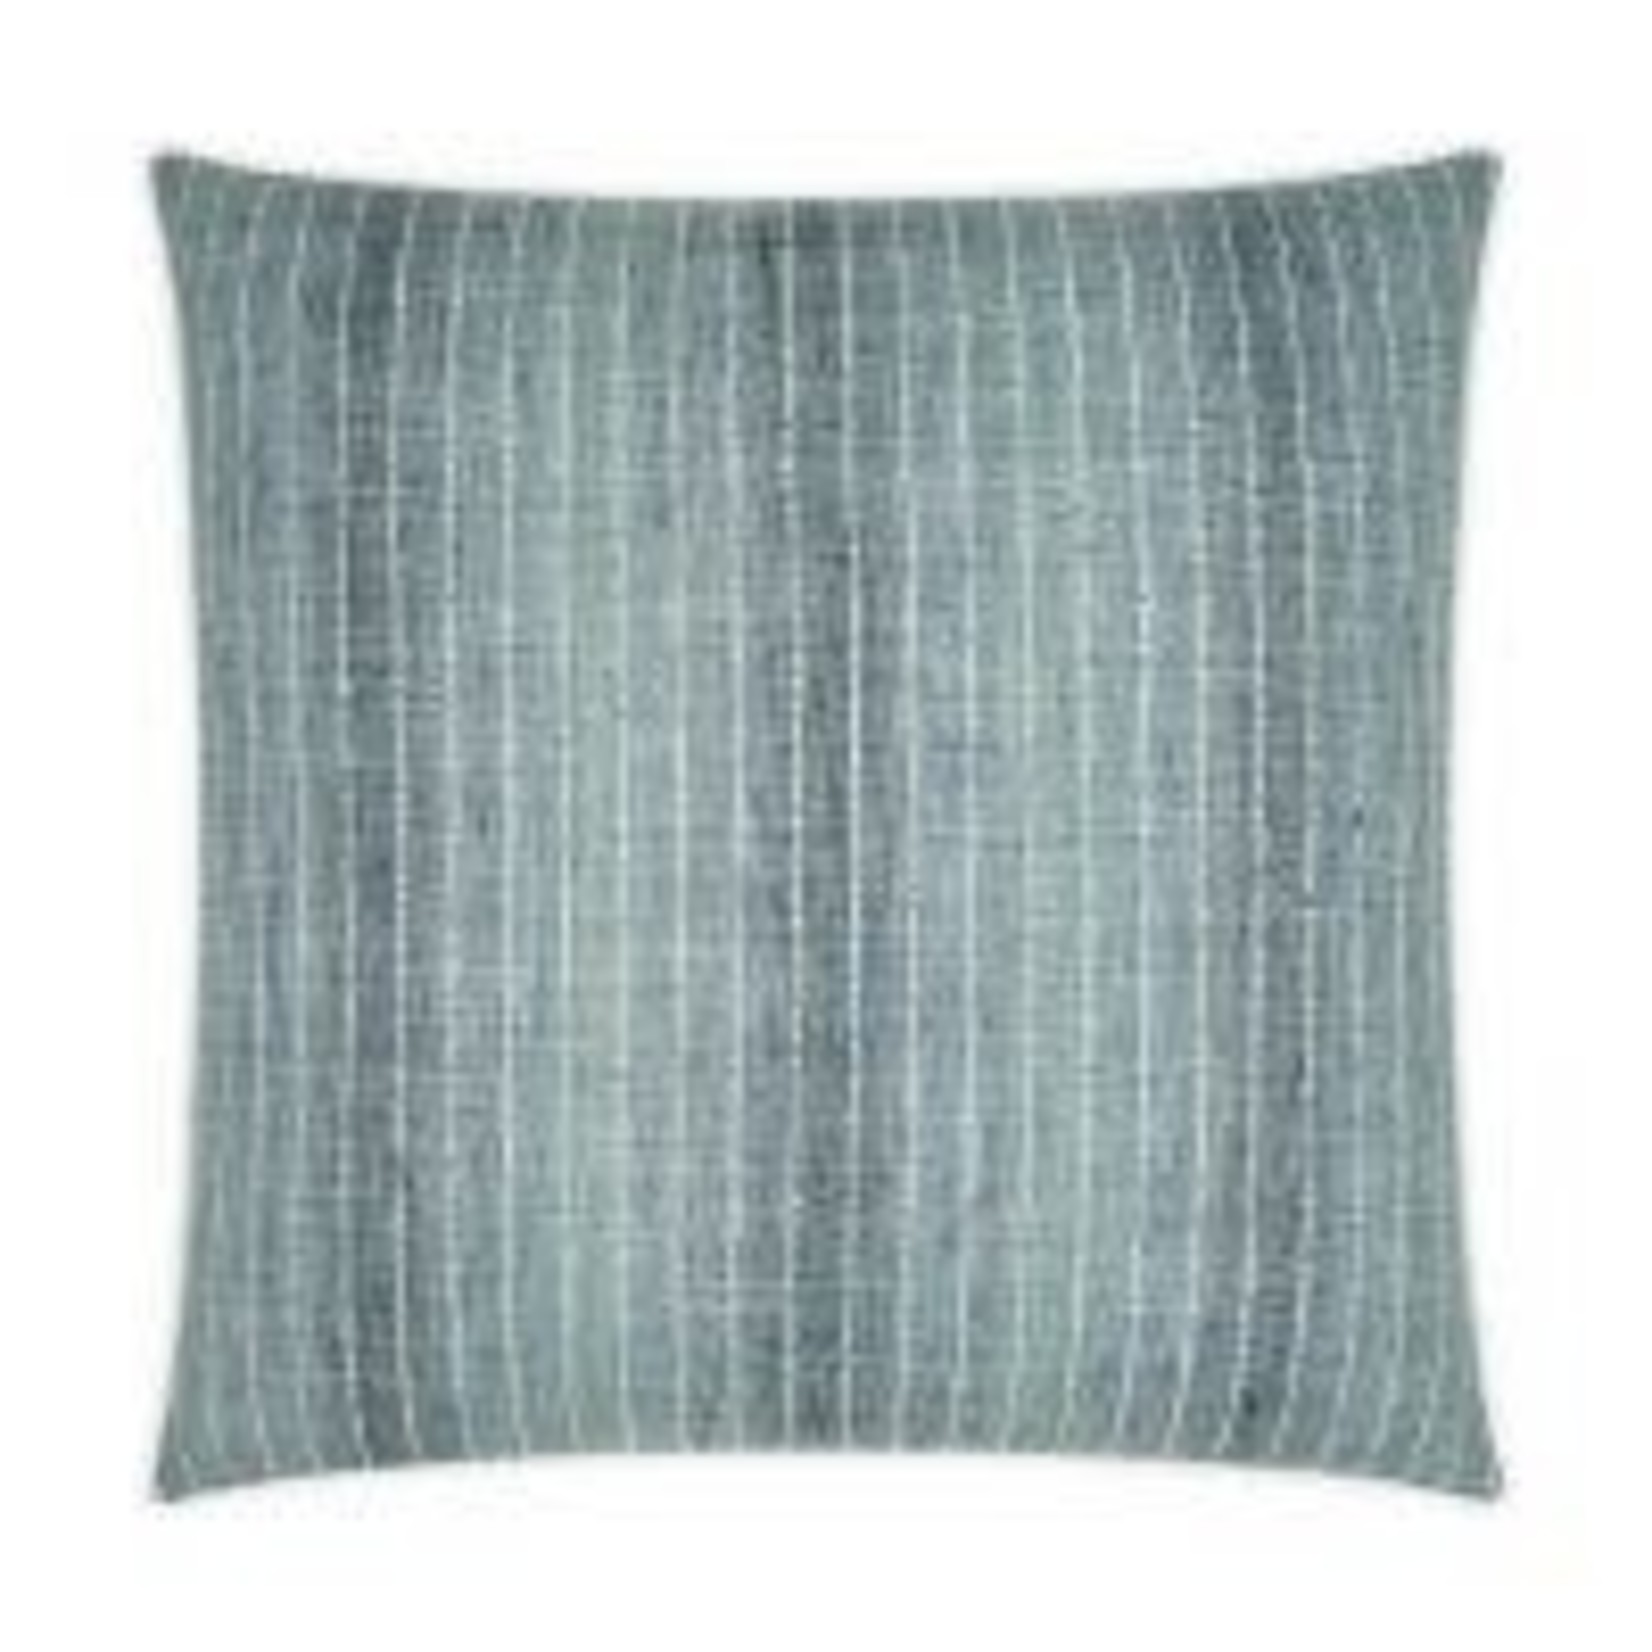 Outside The Box 24x24 Brentwood Square Feather Down Pillow In Lakeland